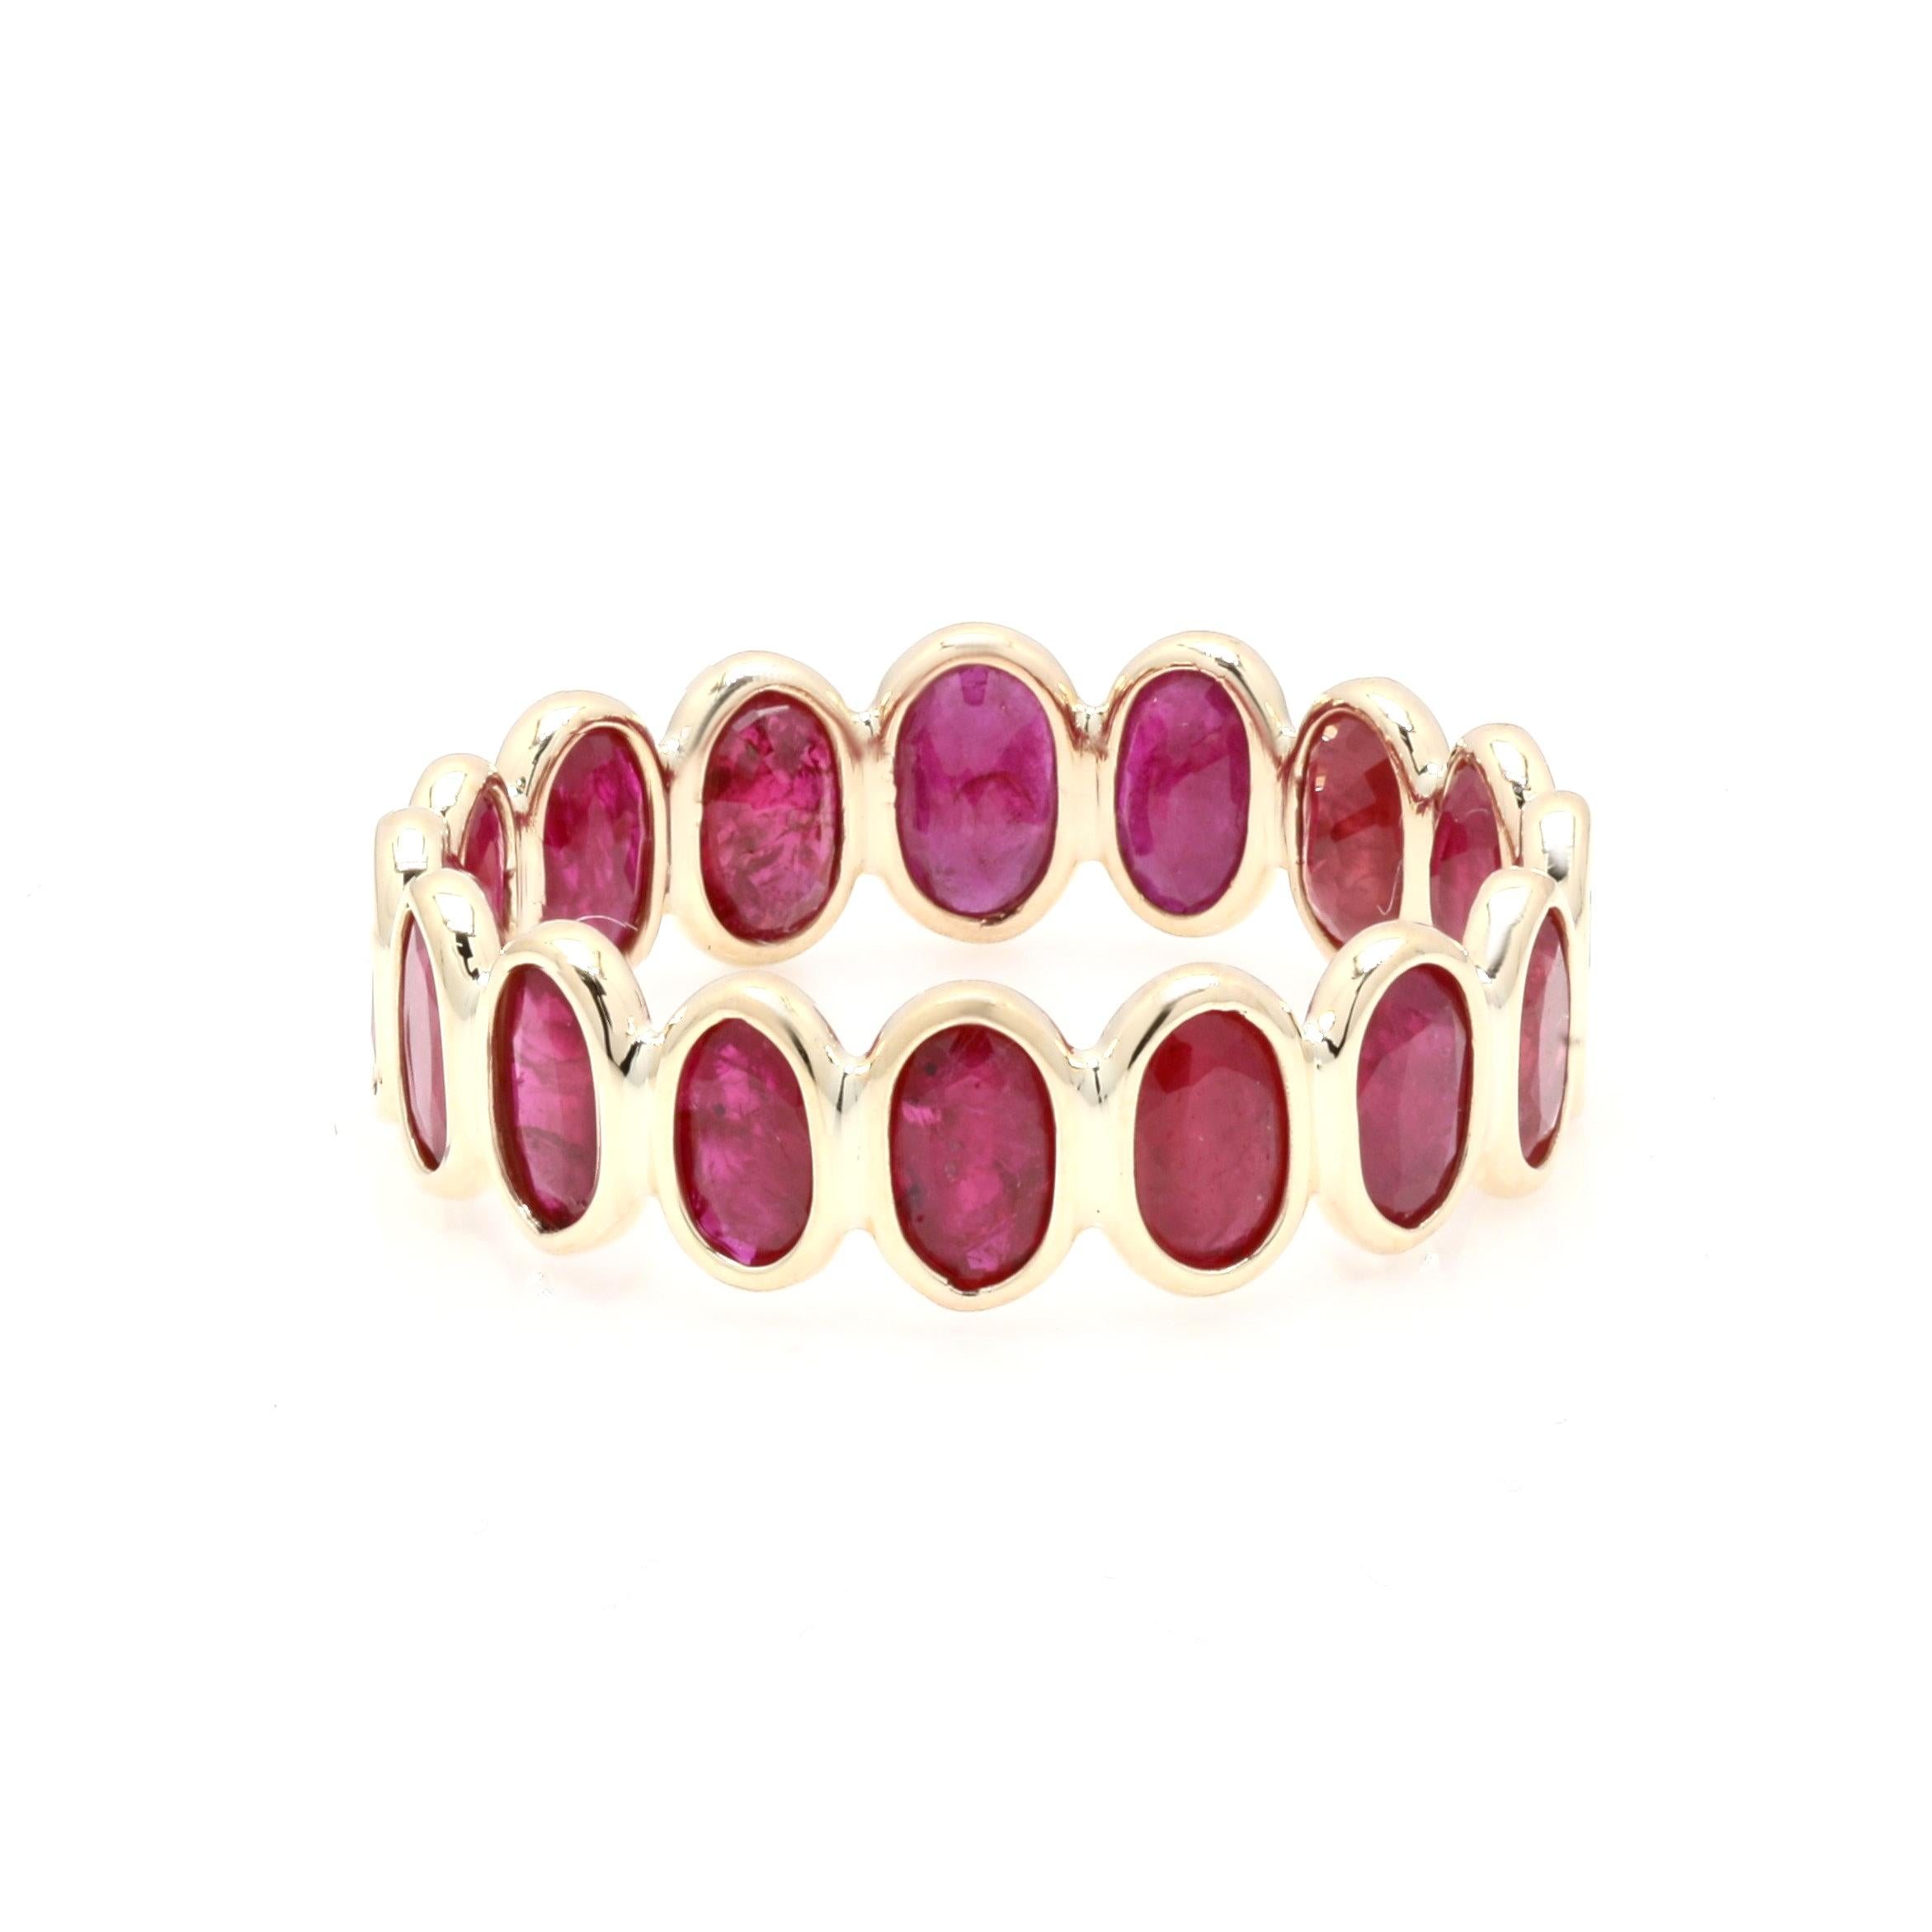 For Sale:  Stackable 4.43 Ct Oval Red Ruby Eternity Band Ring Mounted in 14K Yellow Gold 4